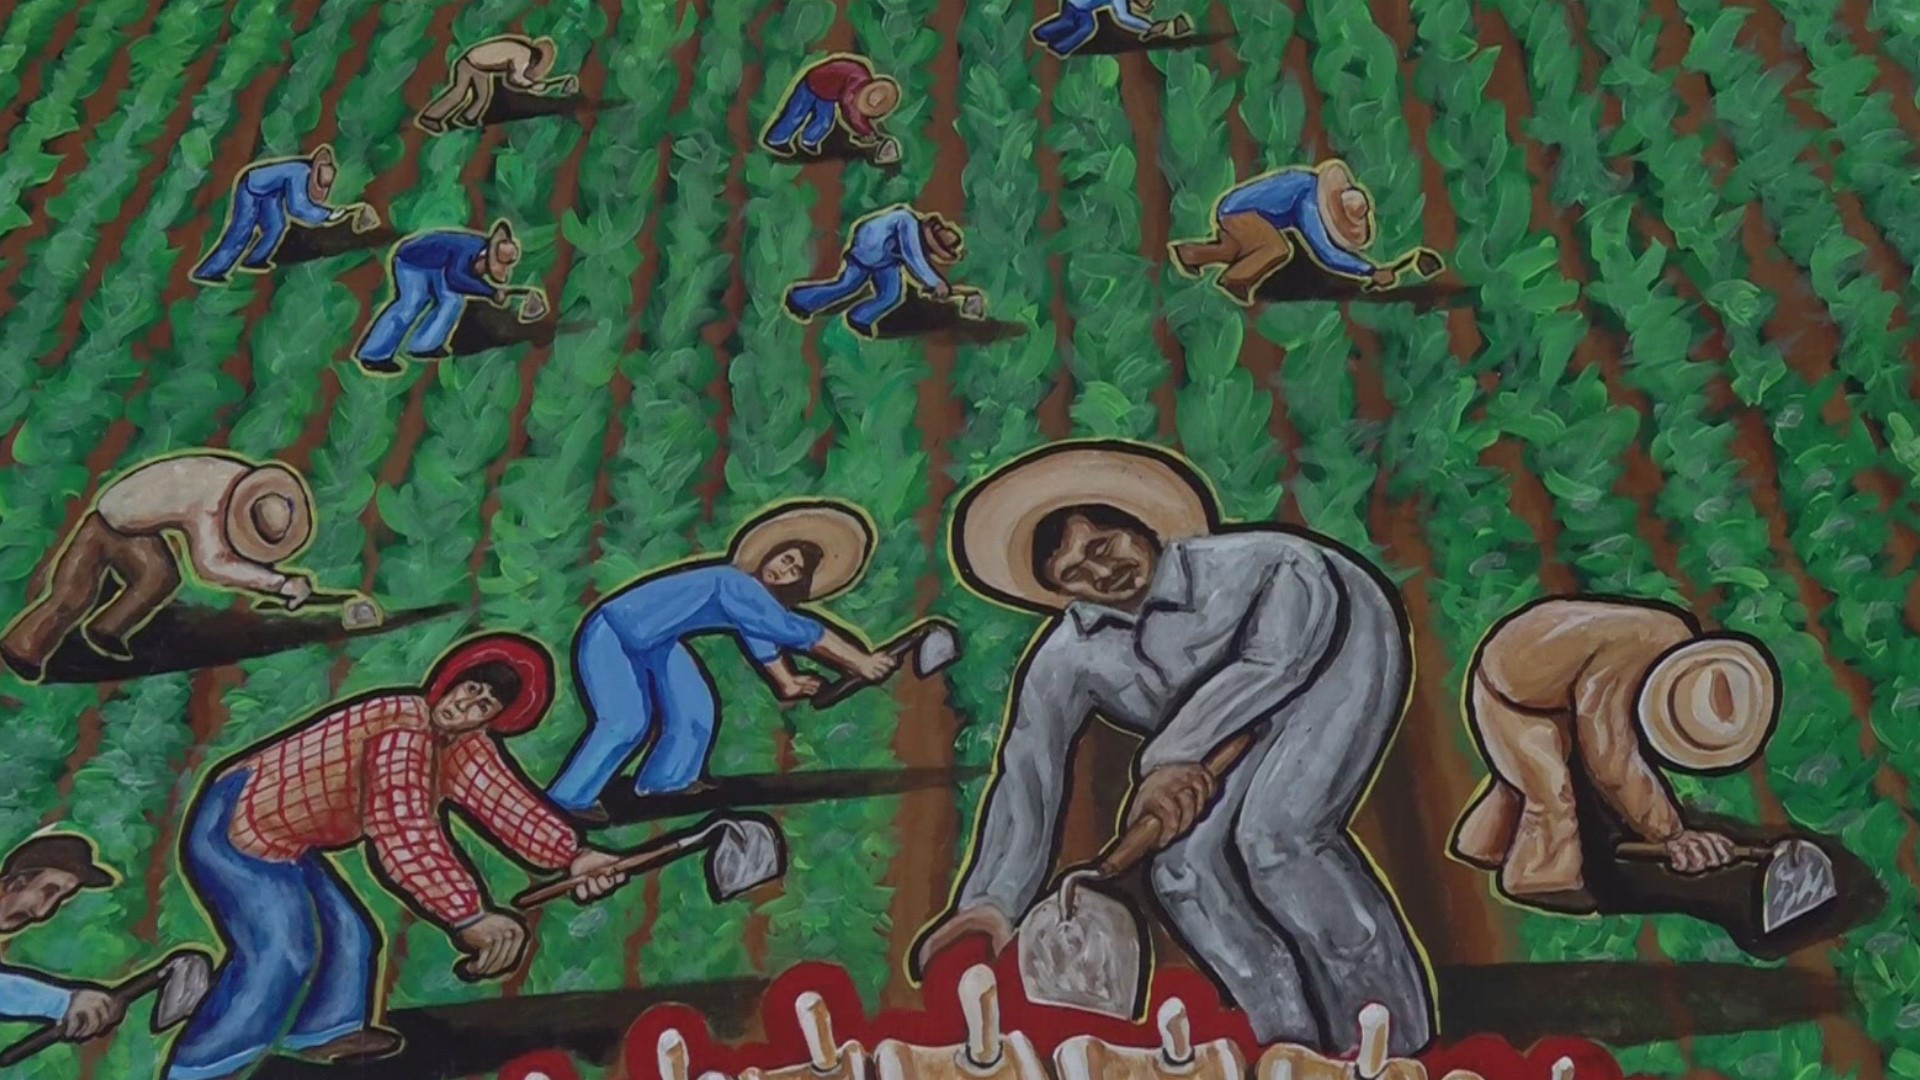 The mural depicts 1960s farmworkers hunched over and forced to use a short-handled tool to wheel, many developed long-term injuries from bending over for hours.